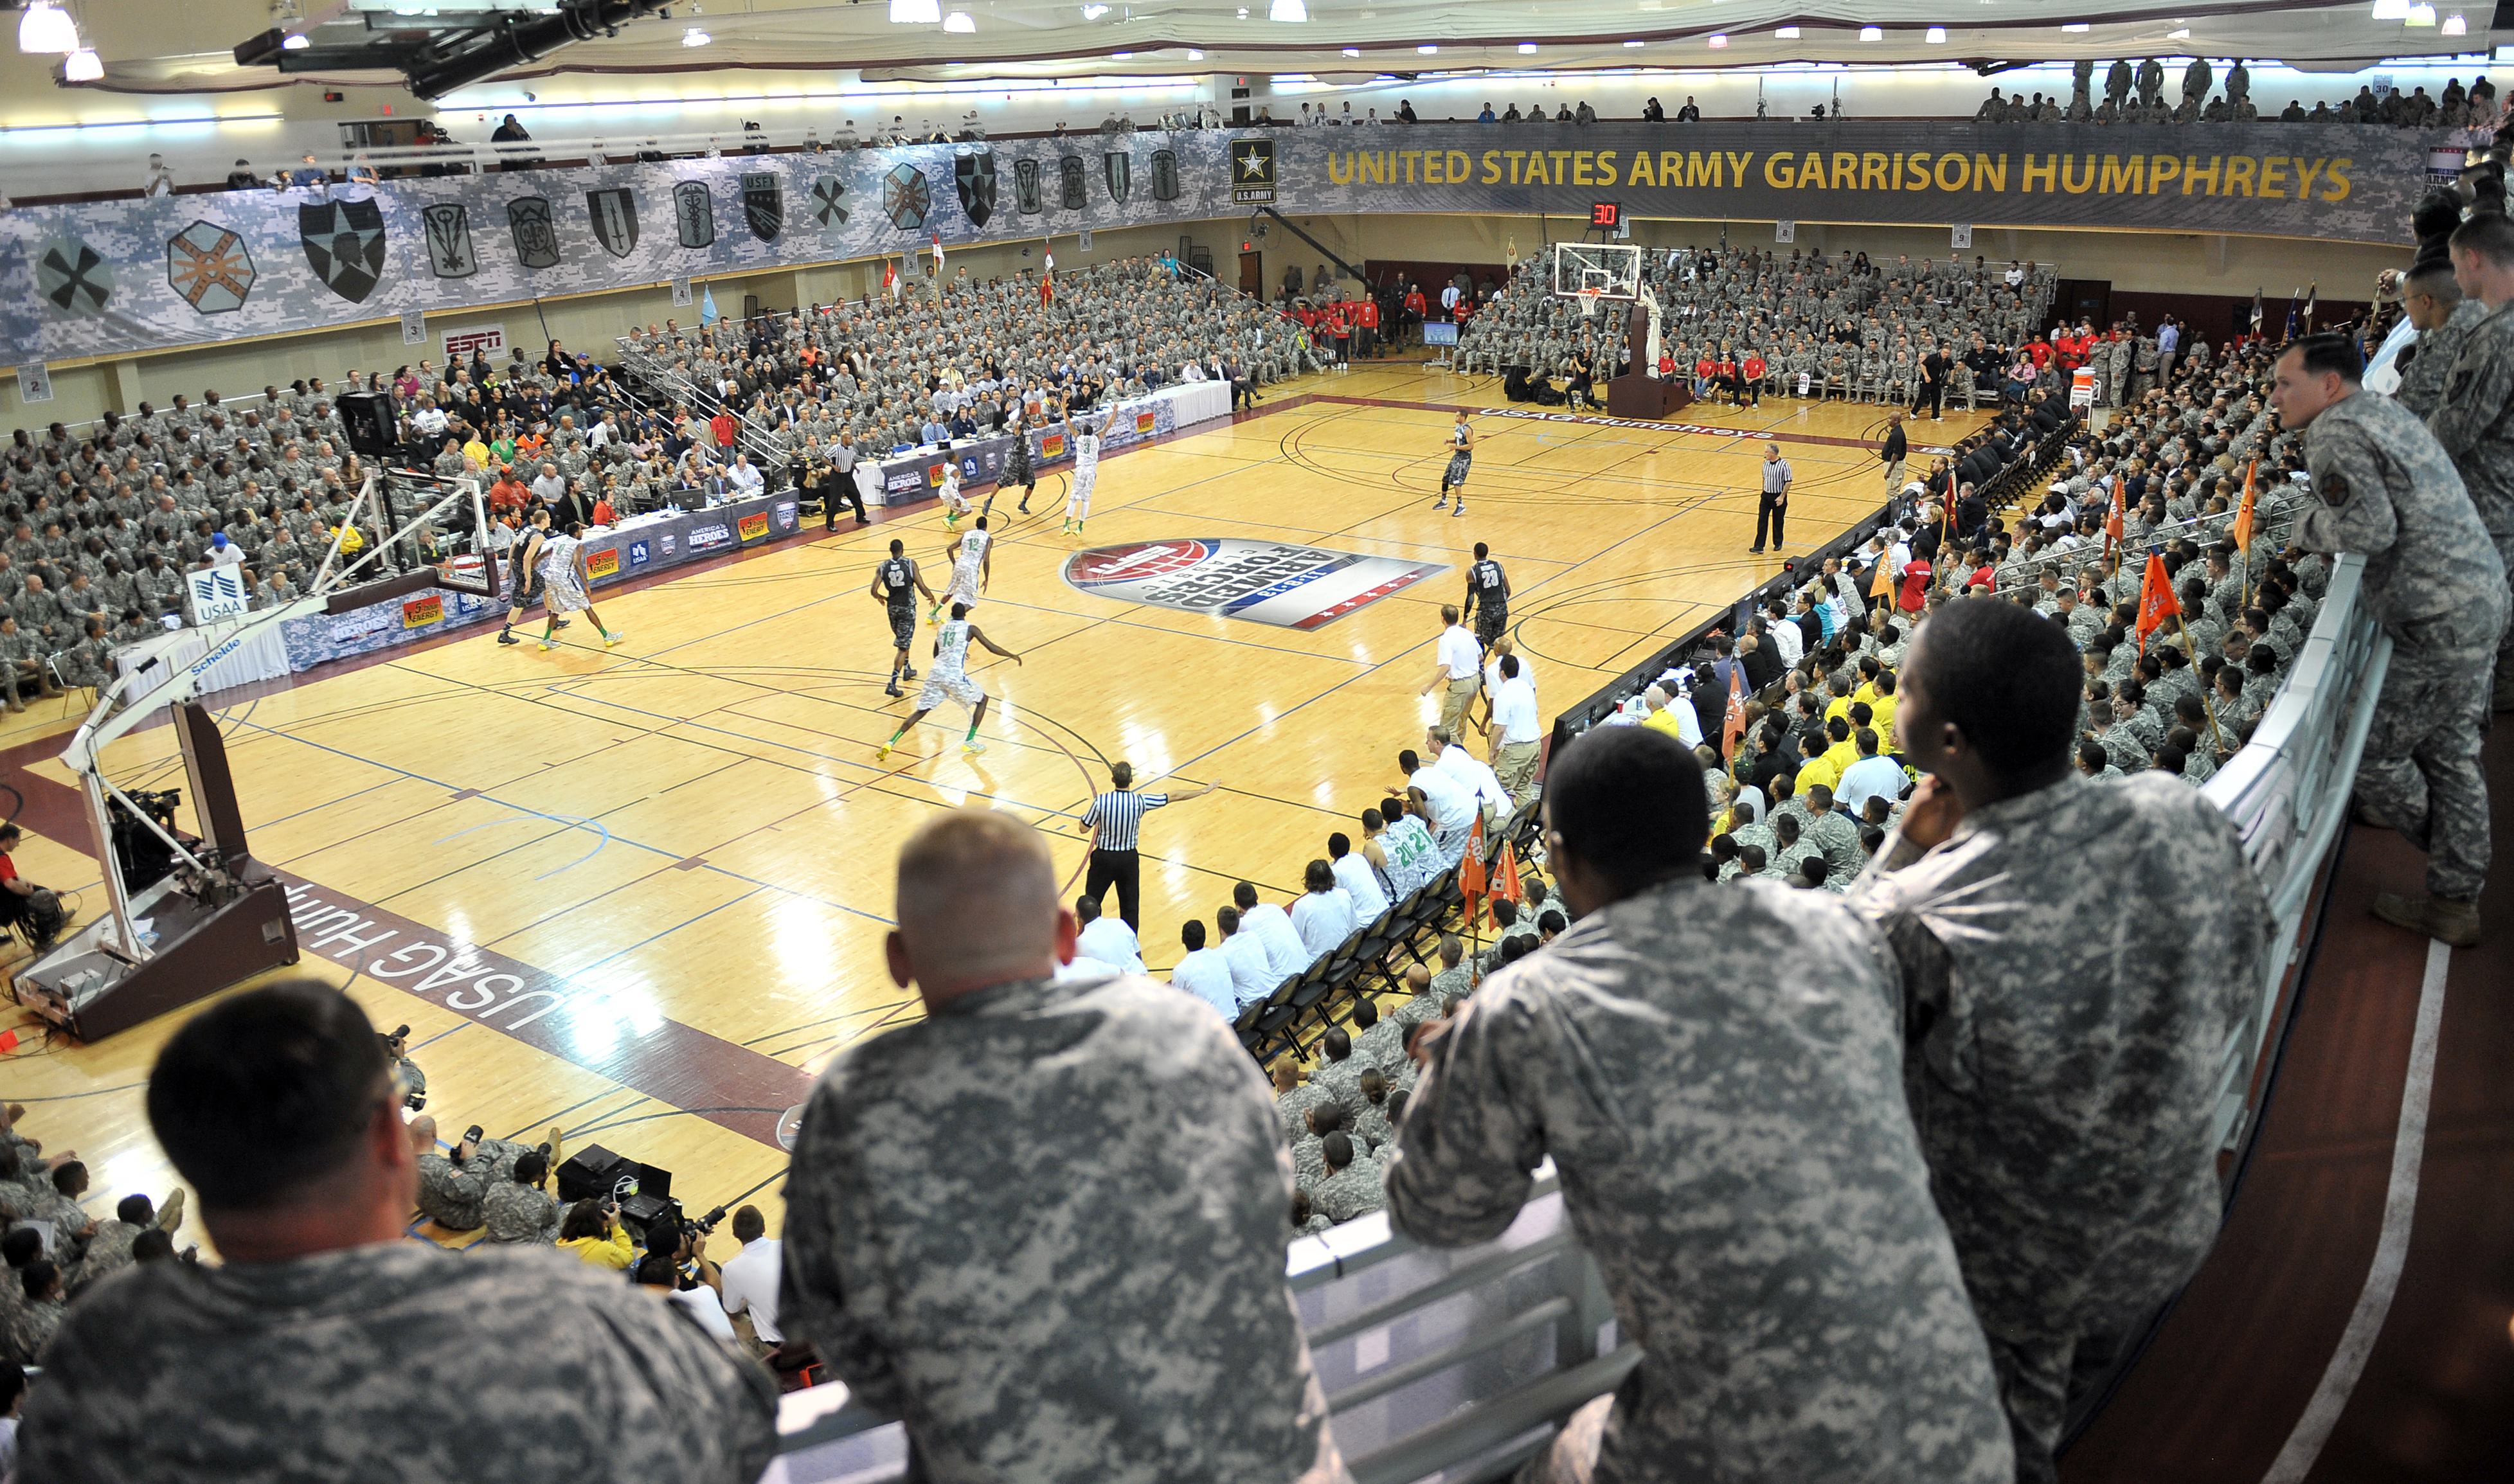 US soldiers watch a game during the Armed Forces Classic of the US college basketball at Camp Humphreys in Pyeongtaek, November 9, 2013. (Jung Yeon-Je—AFP/Getty Images)